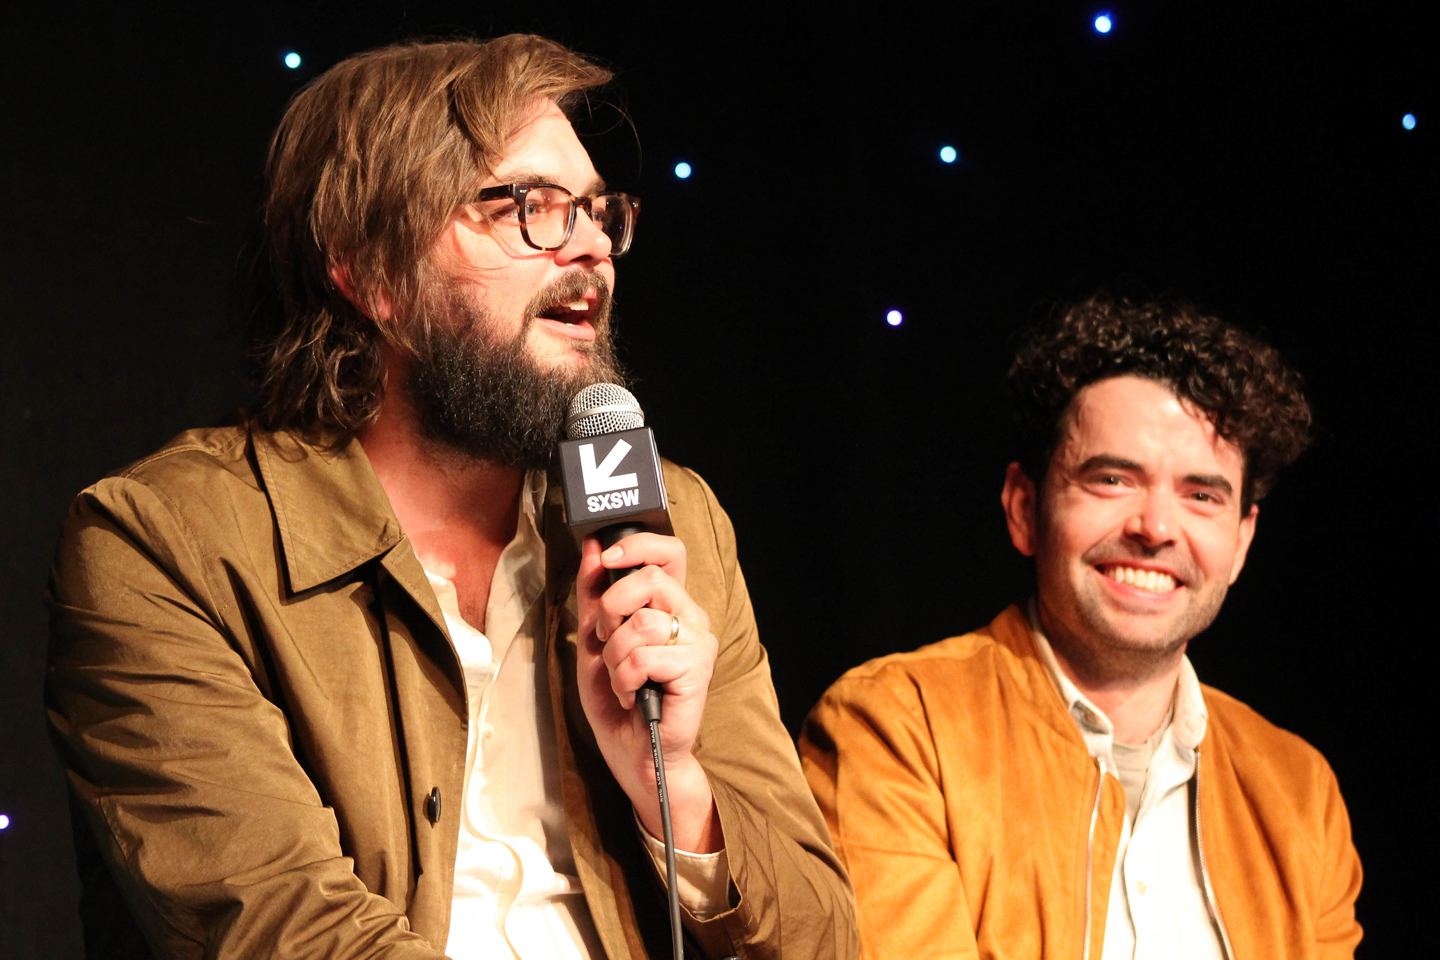 Nick Thune and Nick Rutherford at the Doug Loves Movies Podcast Recording.